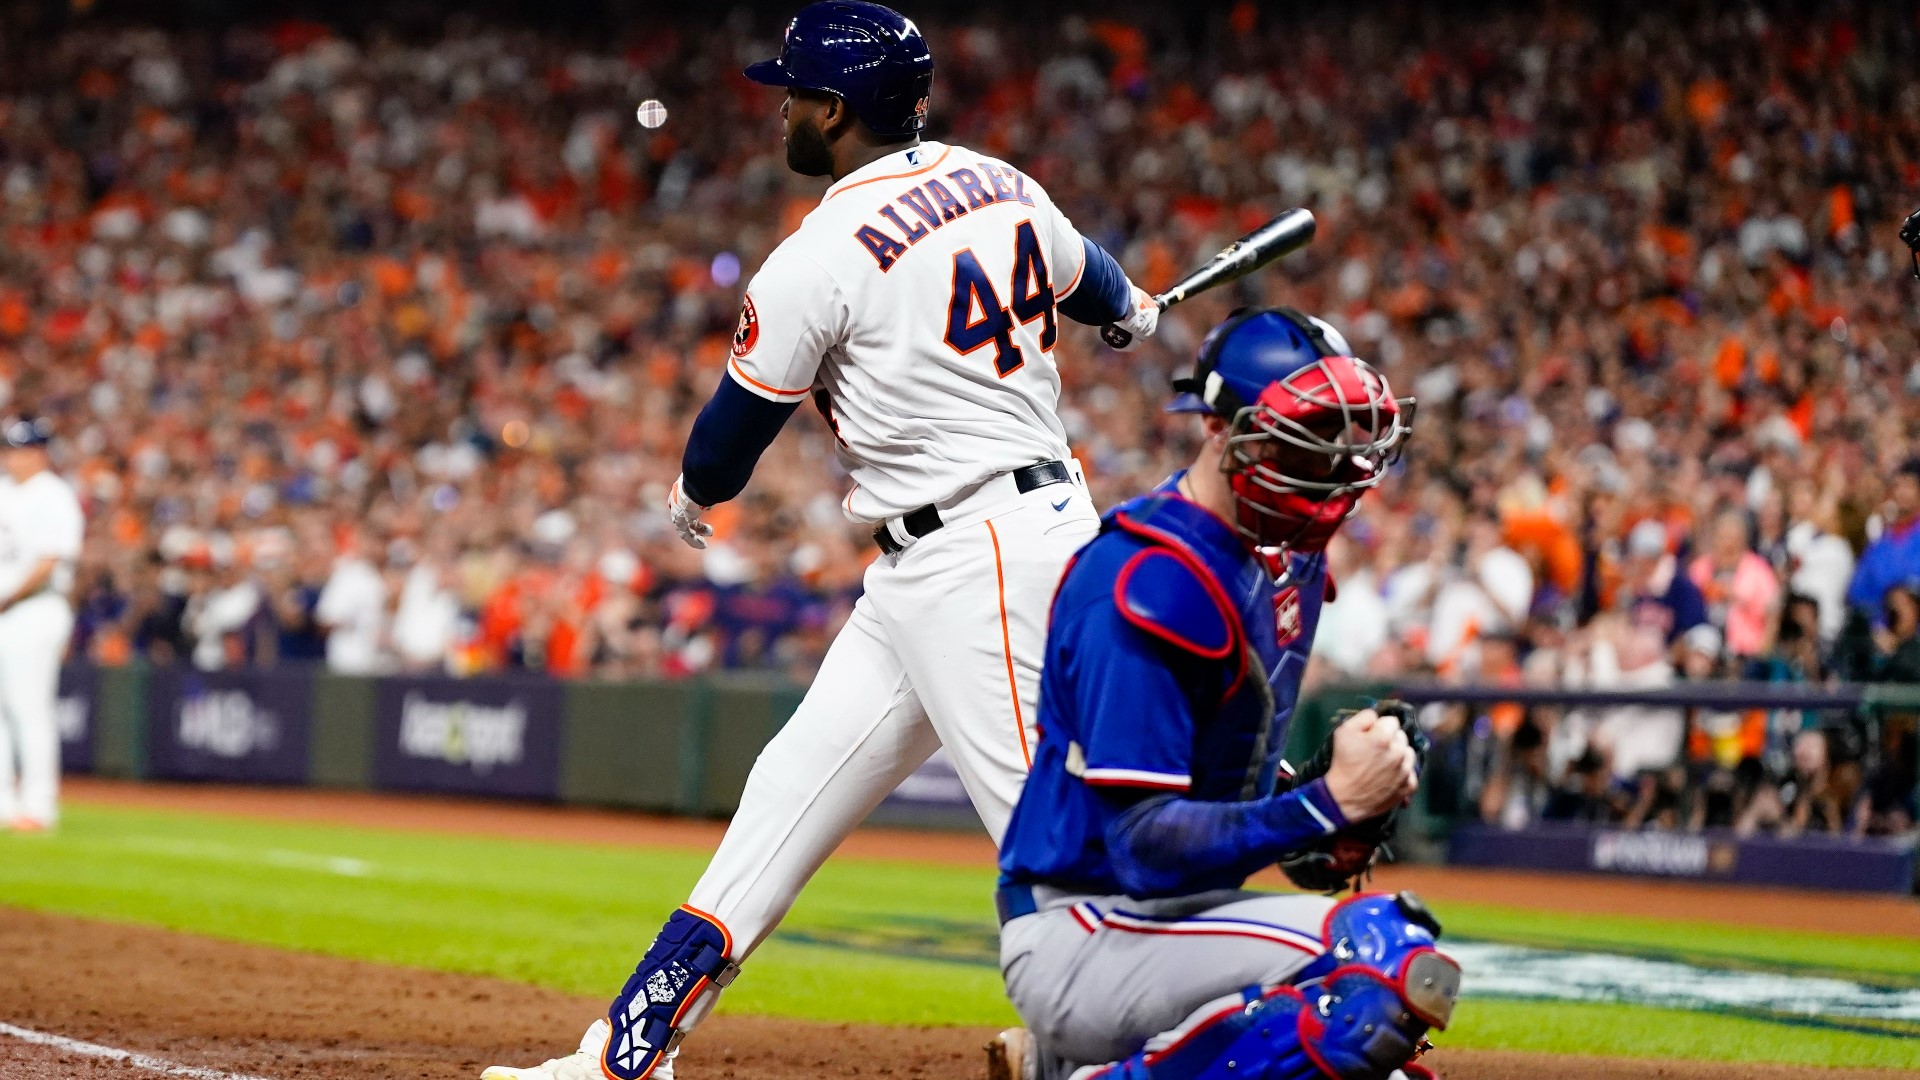 2023 ALCS schedule: When do the Astros and Rangers play?